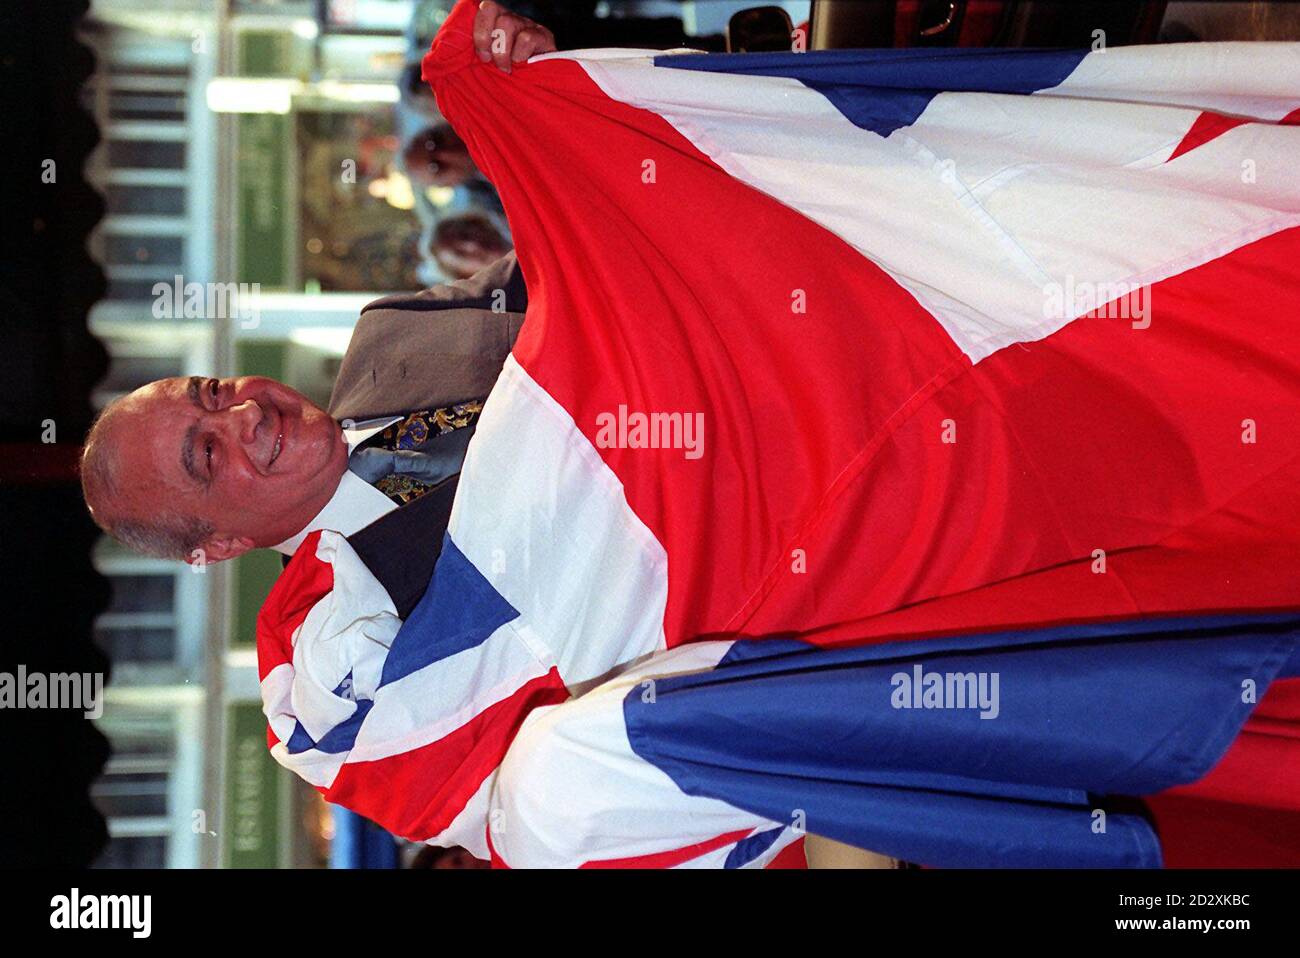 Harrods owner Mohamed Al Fayed wraps himself in a Union Jack flag at the London store. The Al Fayed brothers' battle for citizenship now looks set to be decided by the House of Lords. * after Home Secretary Michael Howard said he would appeal against the court ruling in their favour. Mohamed Al Fayed and his brother Ali, who were born in Egypt but have lived in the UK for 30 years, originally had their application for naturalisation turned down by the High Court. But the Court of Appeal overturned the ruling, deciding by a 2-1 majority that the brothers had not been treated fairly because the Stock Photo